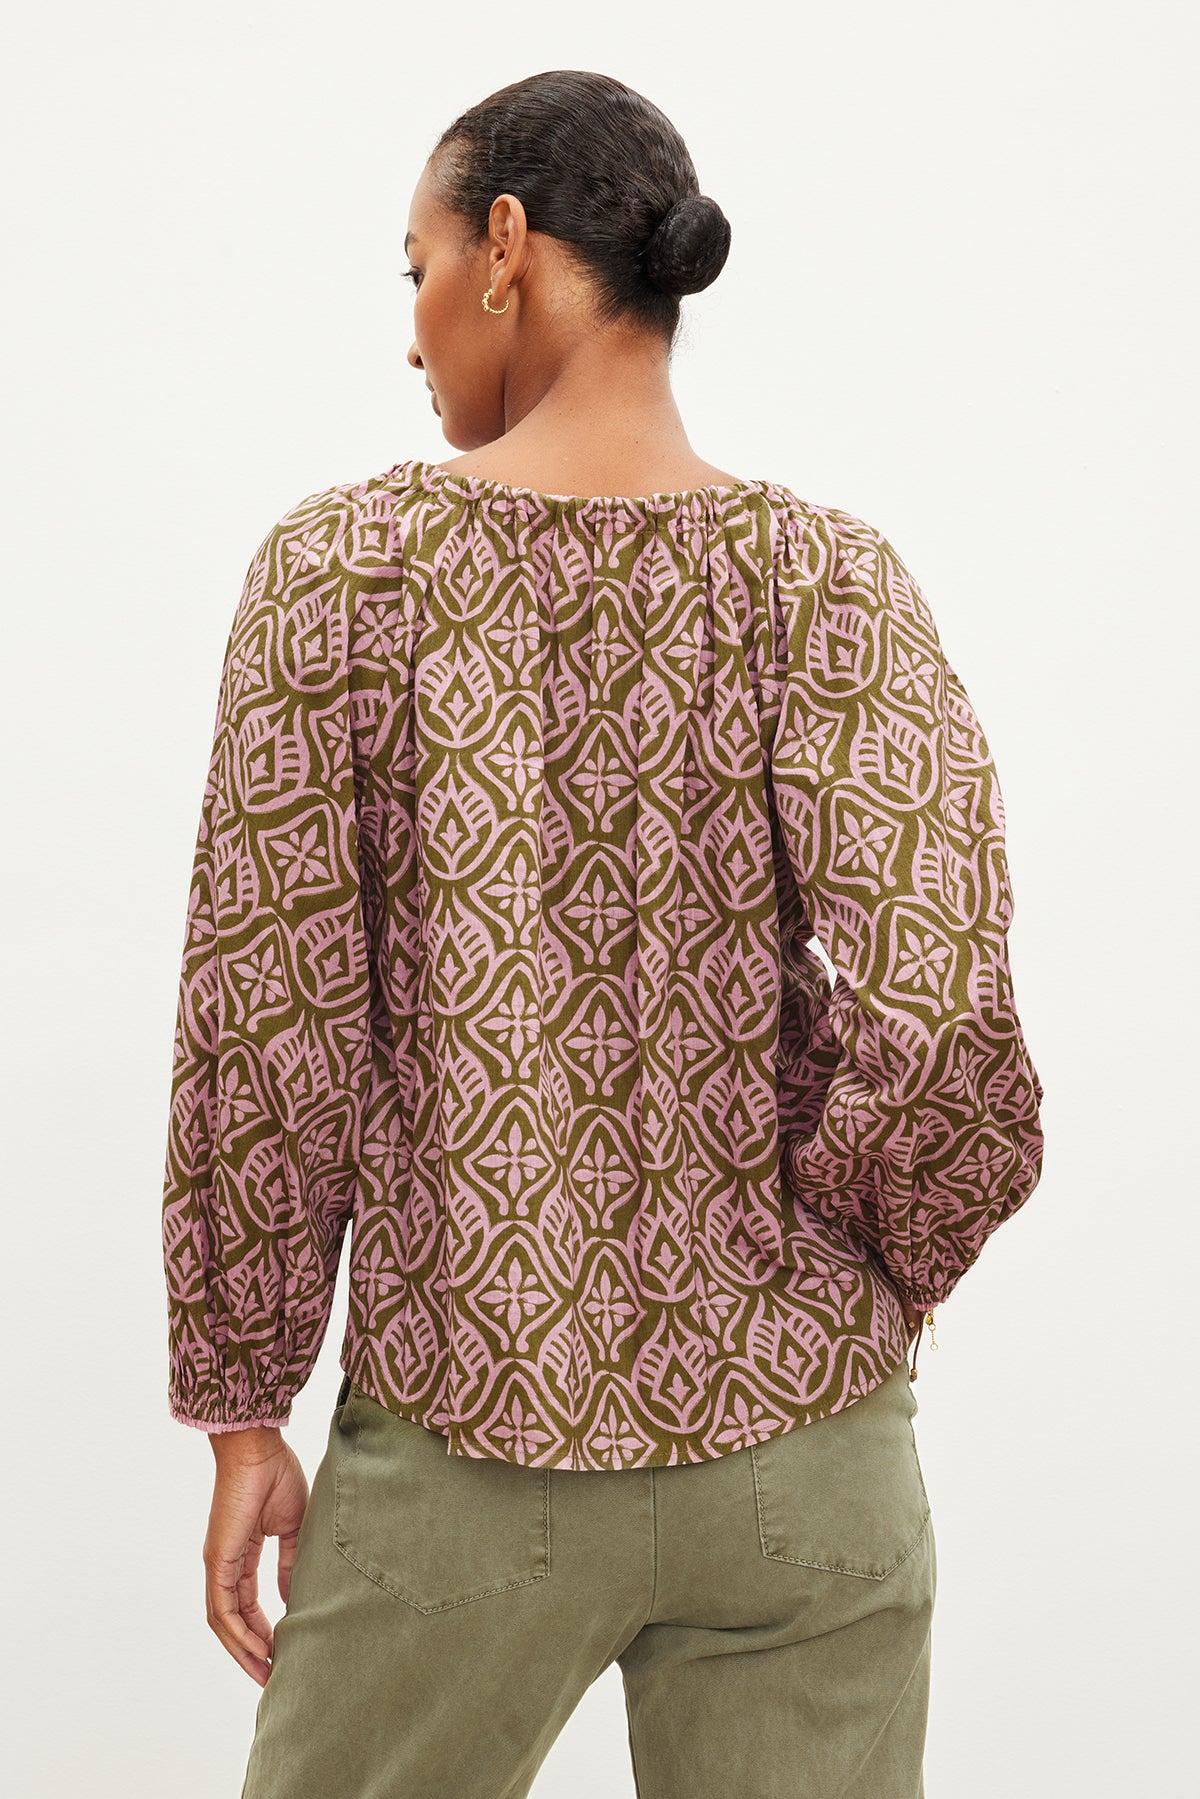   The back view of a woman wearing the Velvet by Graham & Spencer MARIAN PRINTED BUTTON FRONT TOP with a geometric pattern. The blouse features a v-neckline and is made of mosaic printed cotton, with the buttoned front adding an extra touch. 